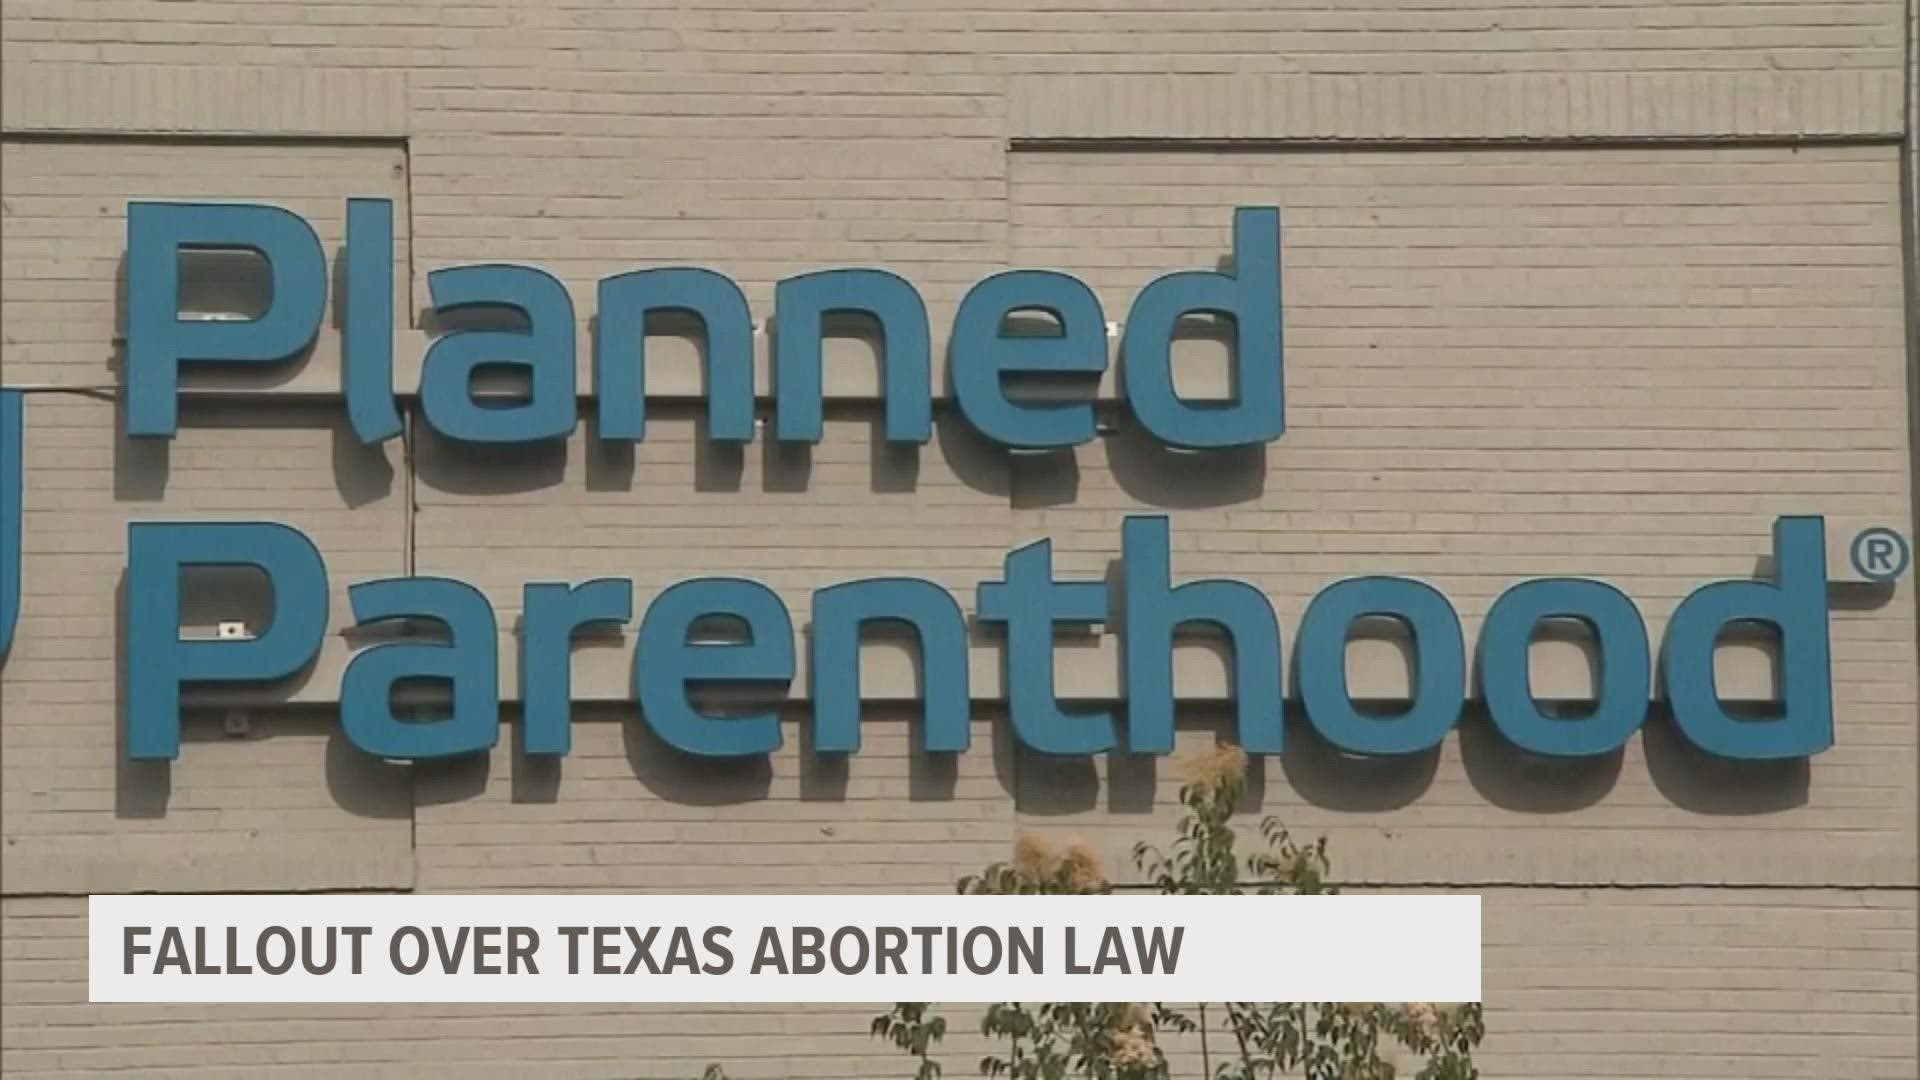 The TRO request is in response to the new Texas law that bans abortions after six weeks.